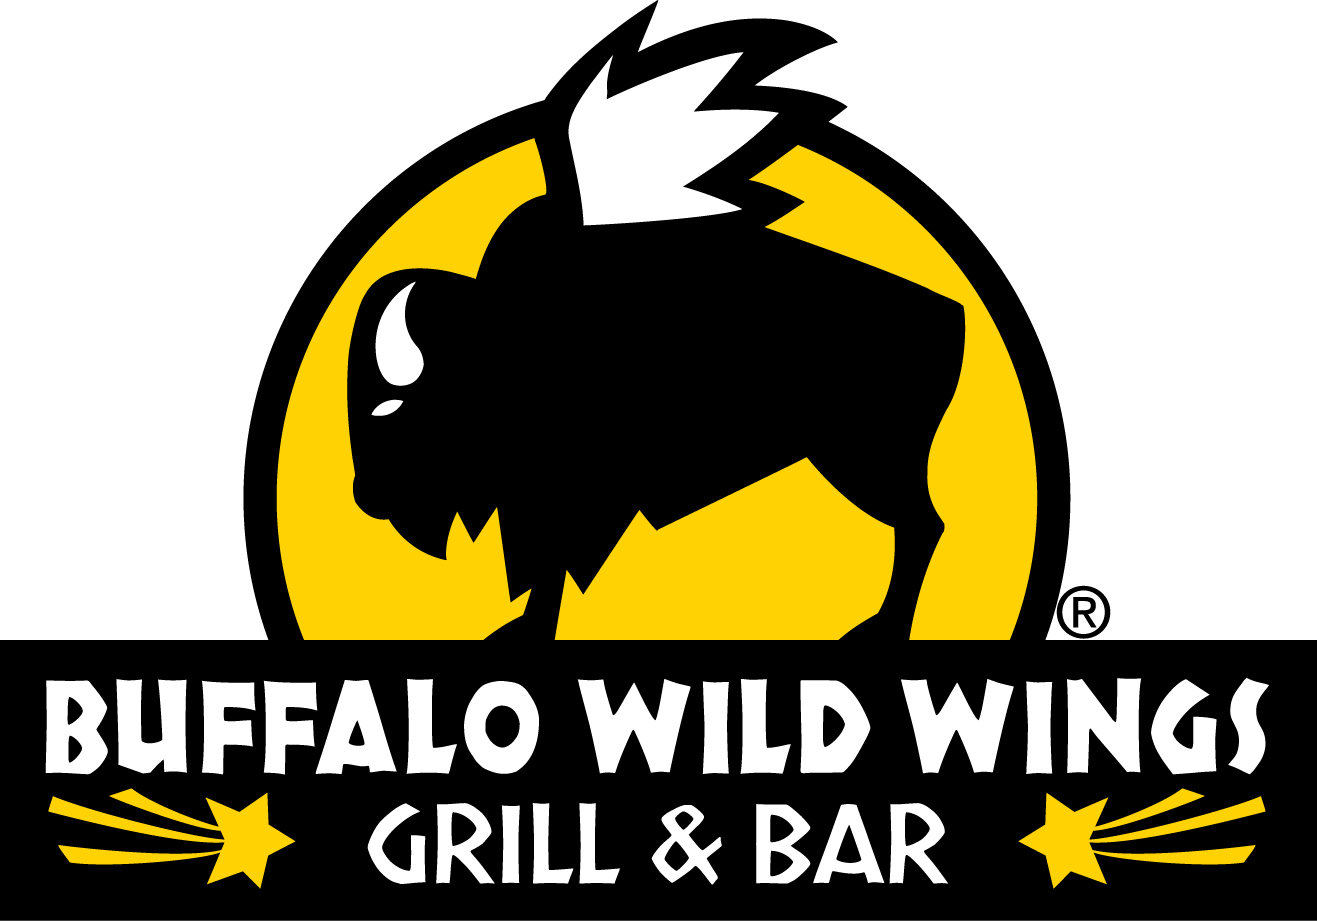 råd Remission Barry Chicken Prices Are Pecking Away At Buffalo Wild Wings' Margins (Private:BWLD)  | Seeking Alpha